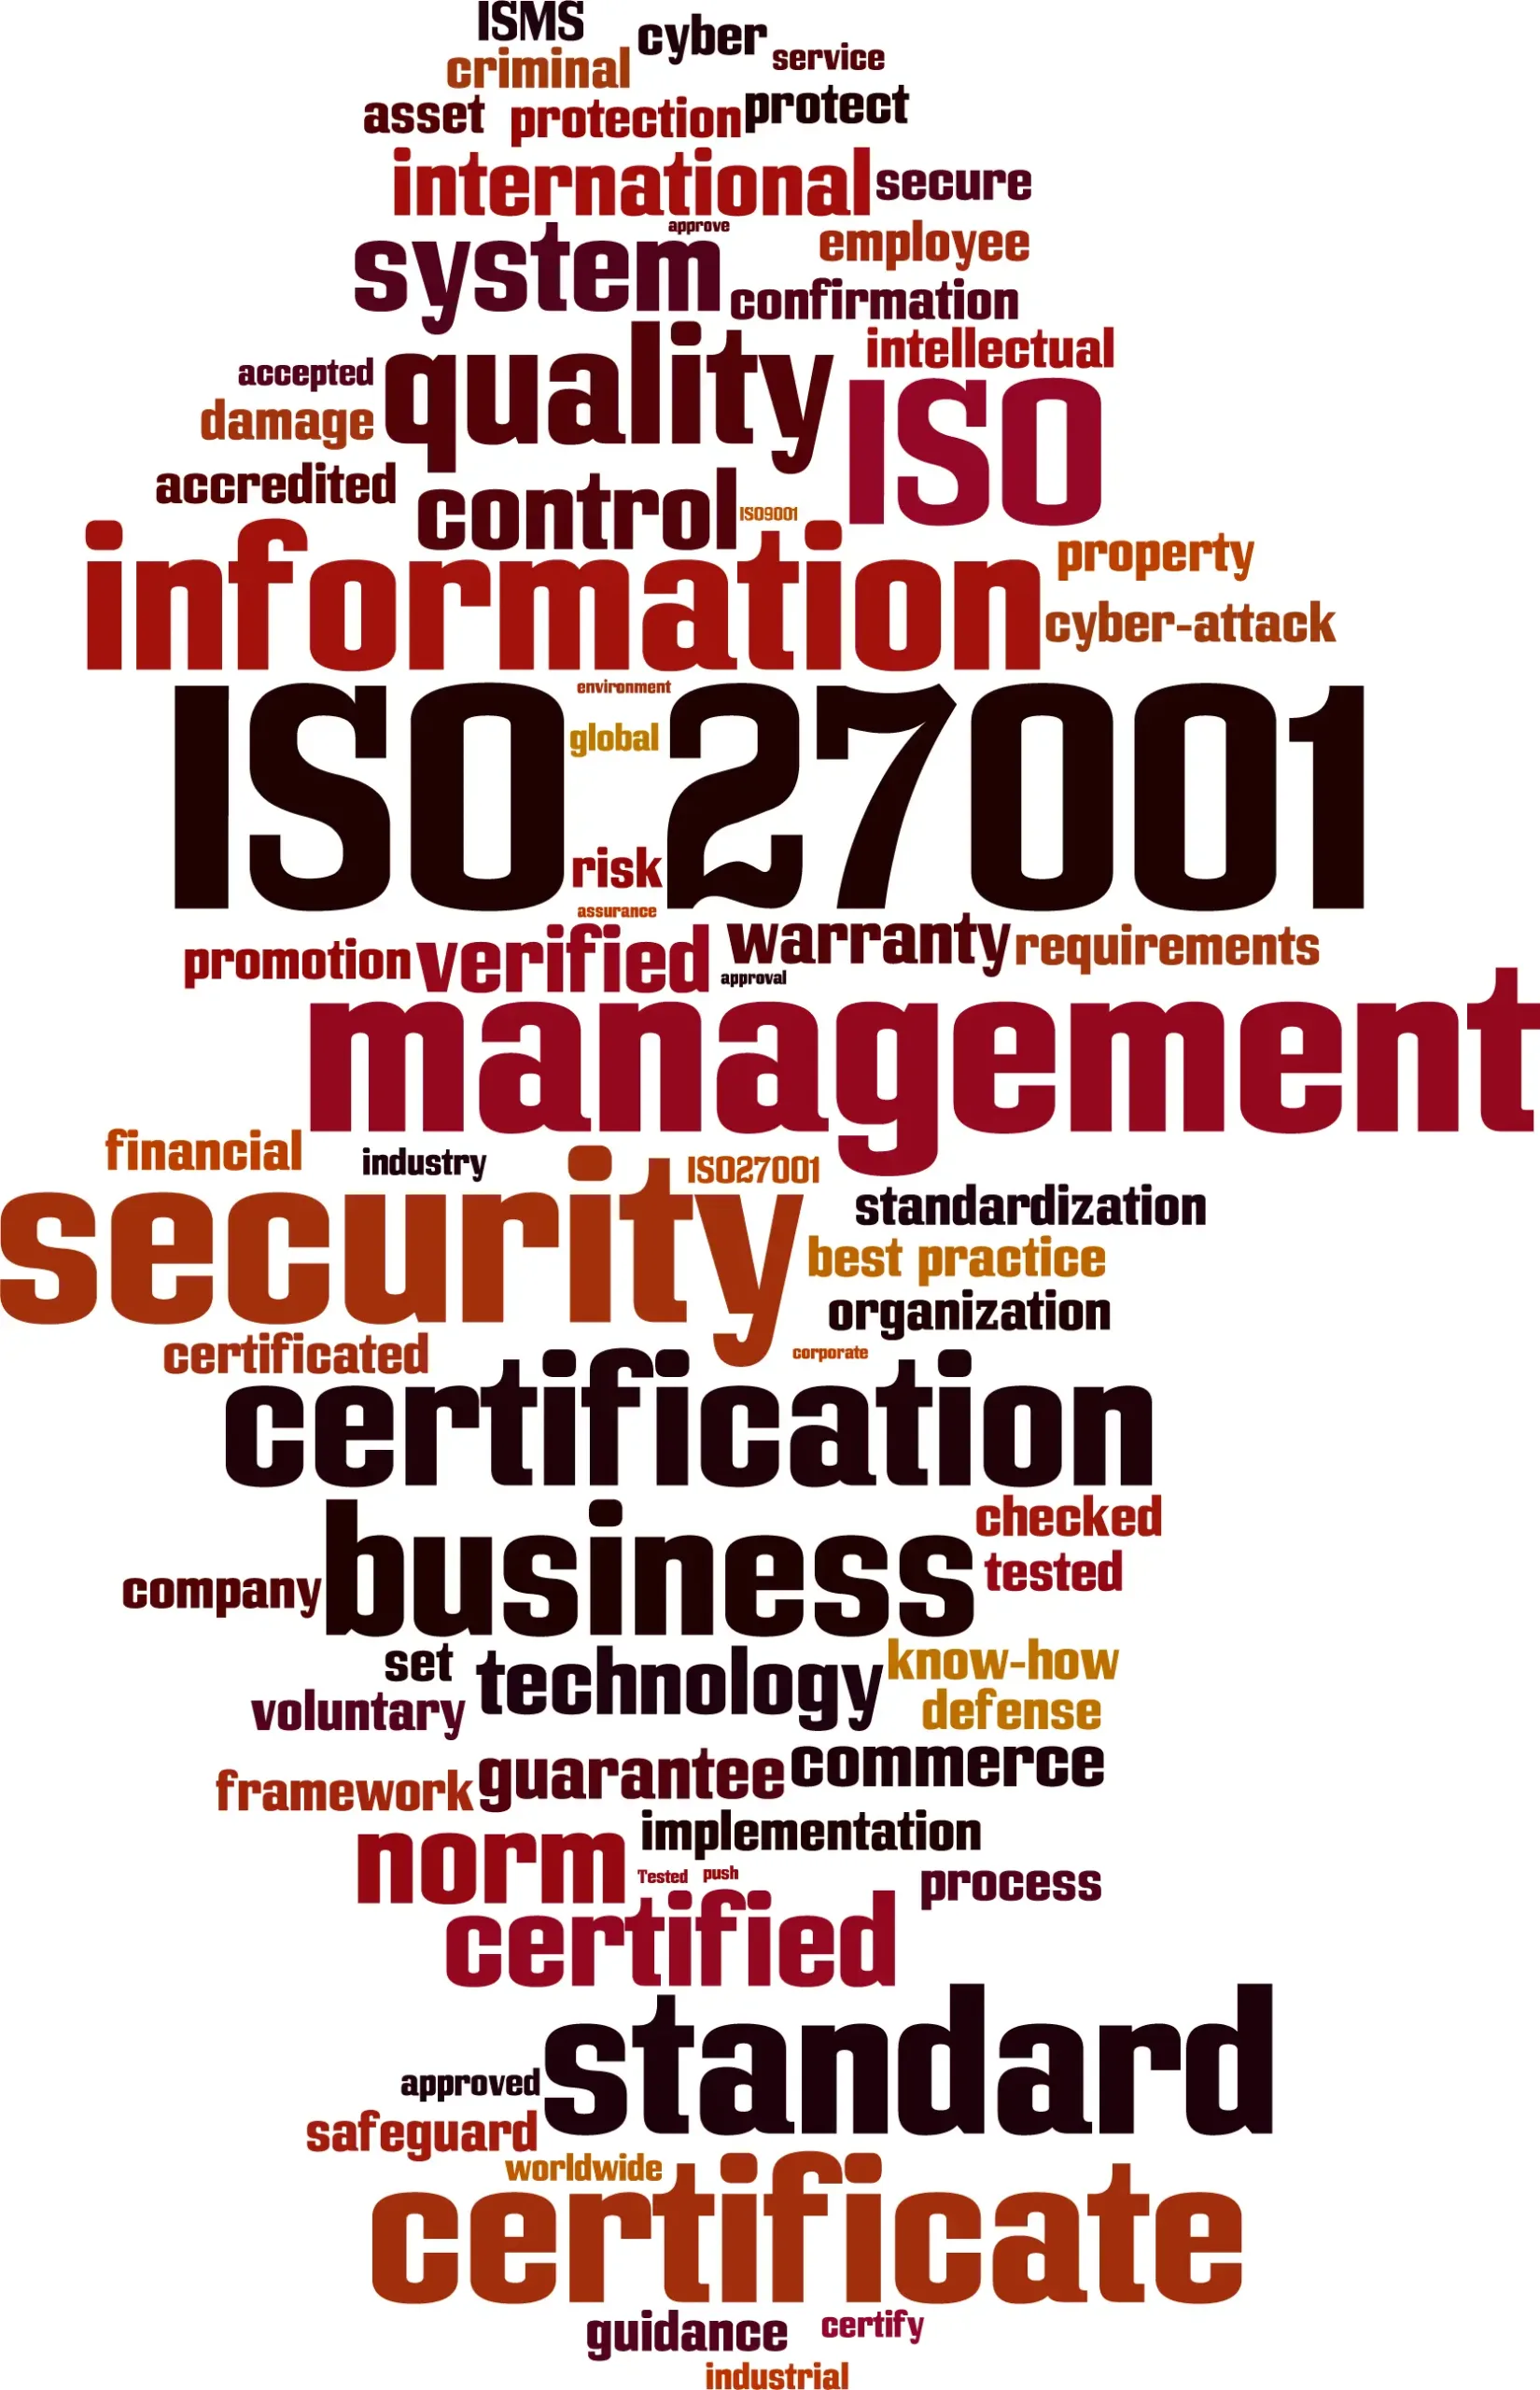 image refers to ISO 27001 Information Security Management Systems